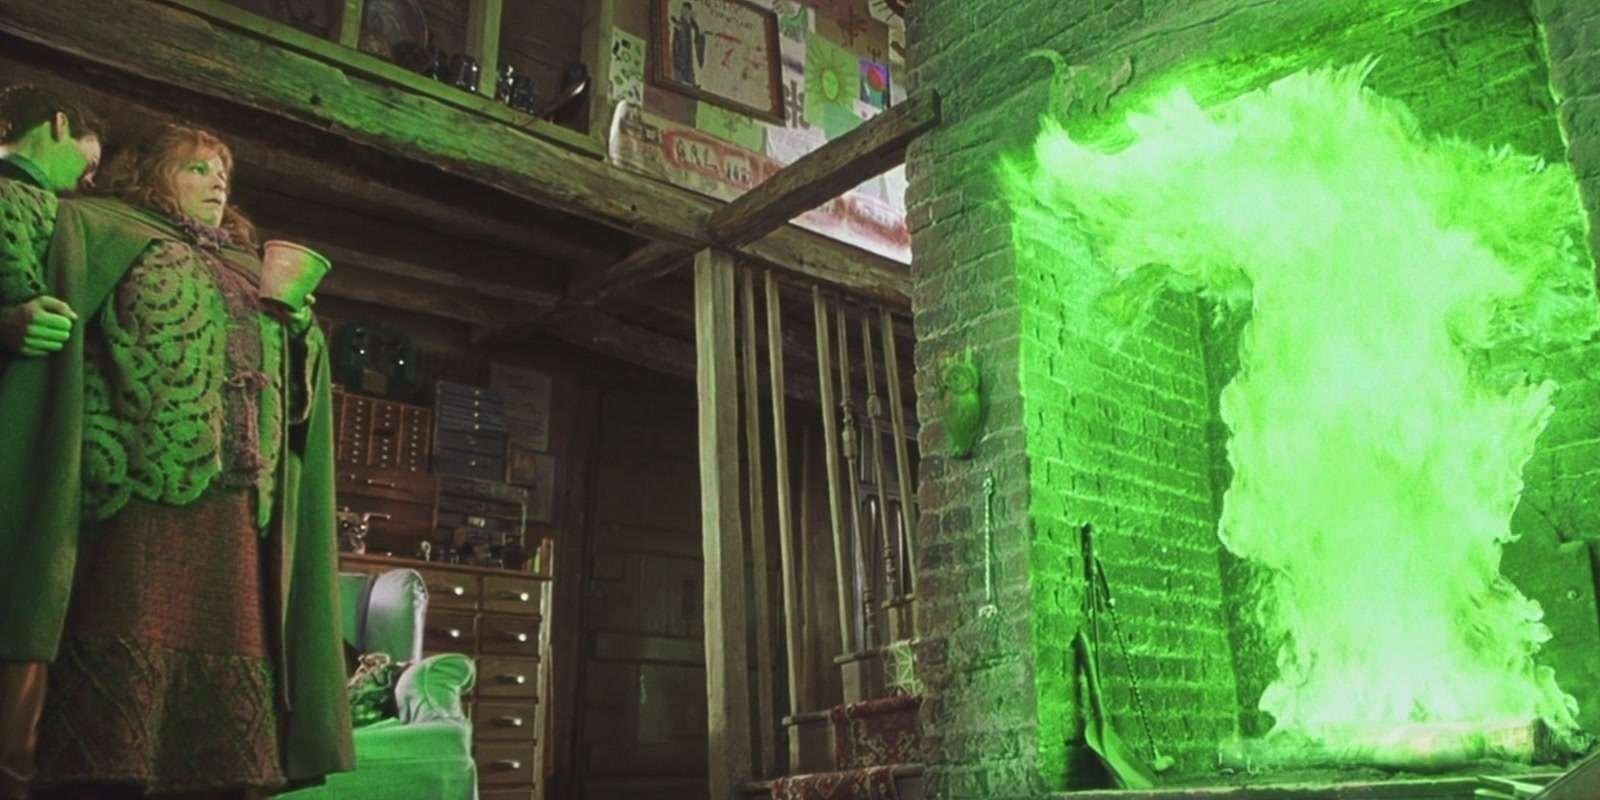 The green floo network in the Harry Potter movies